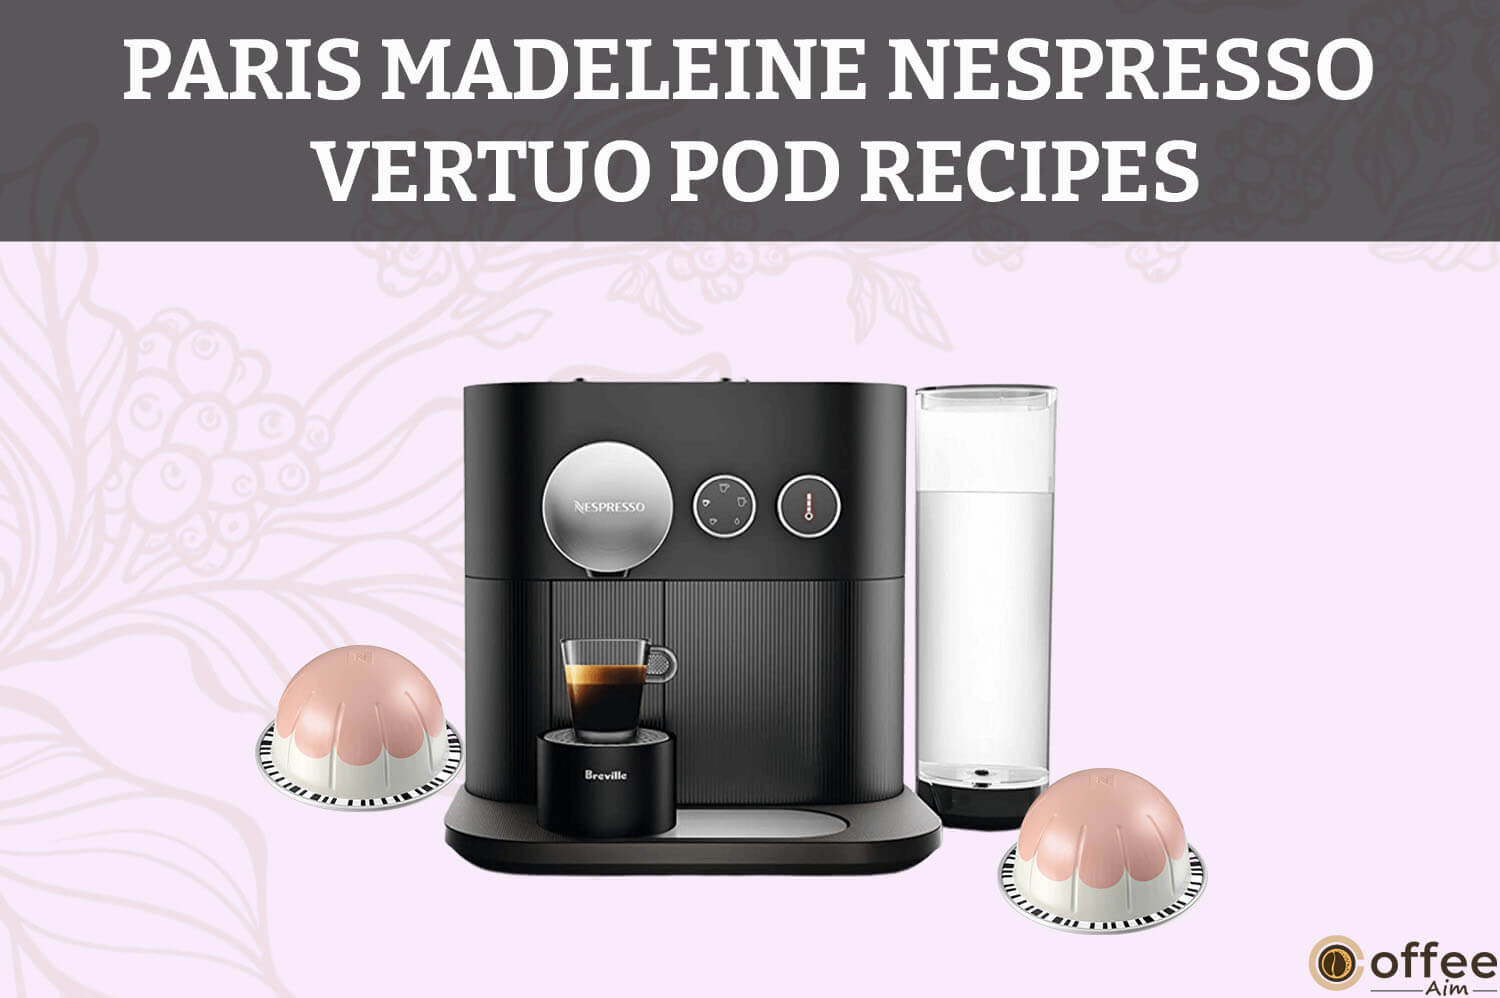 Featured image for the article "Paris Madeleine Nespresso Vertuo Pod Recipes"